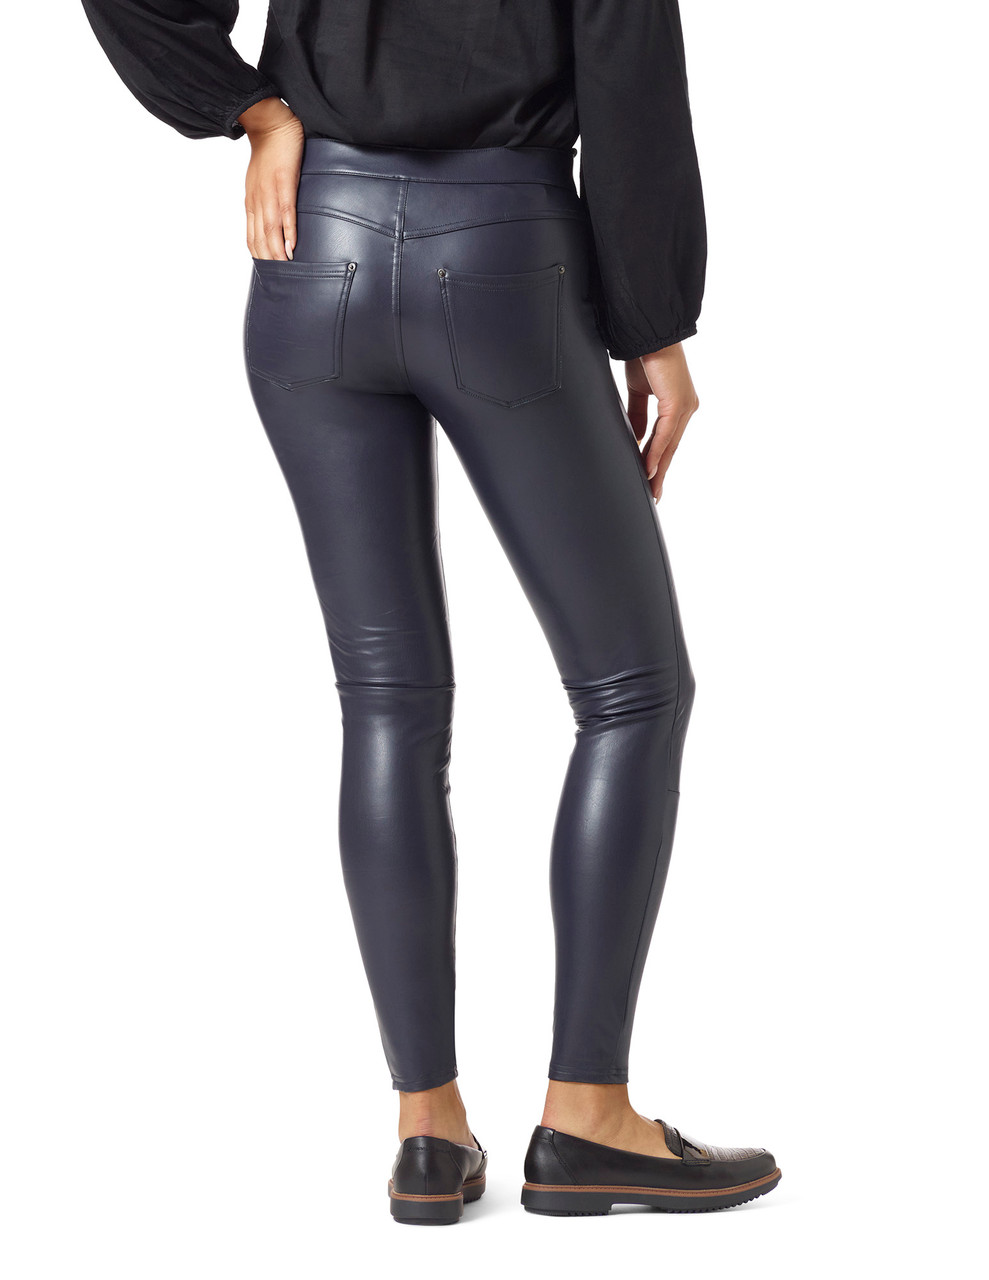 HUE Women's Faux Leather Leggings, Black, Extra Small at  Women's  Clothing store